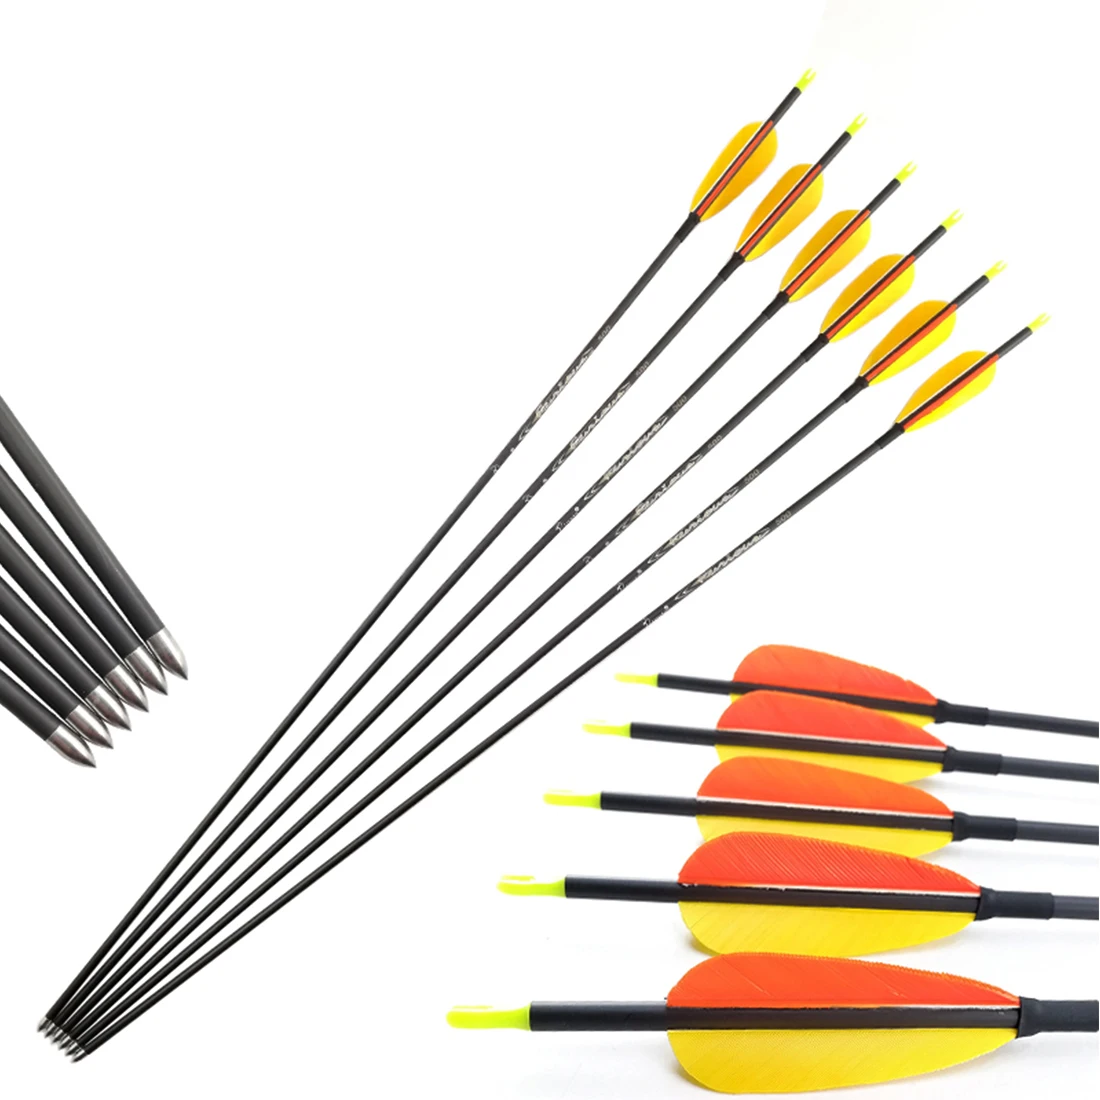 Archery Hunting Shooting Spine Carbon Arrow Feather For Compound Recurved Bows 